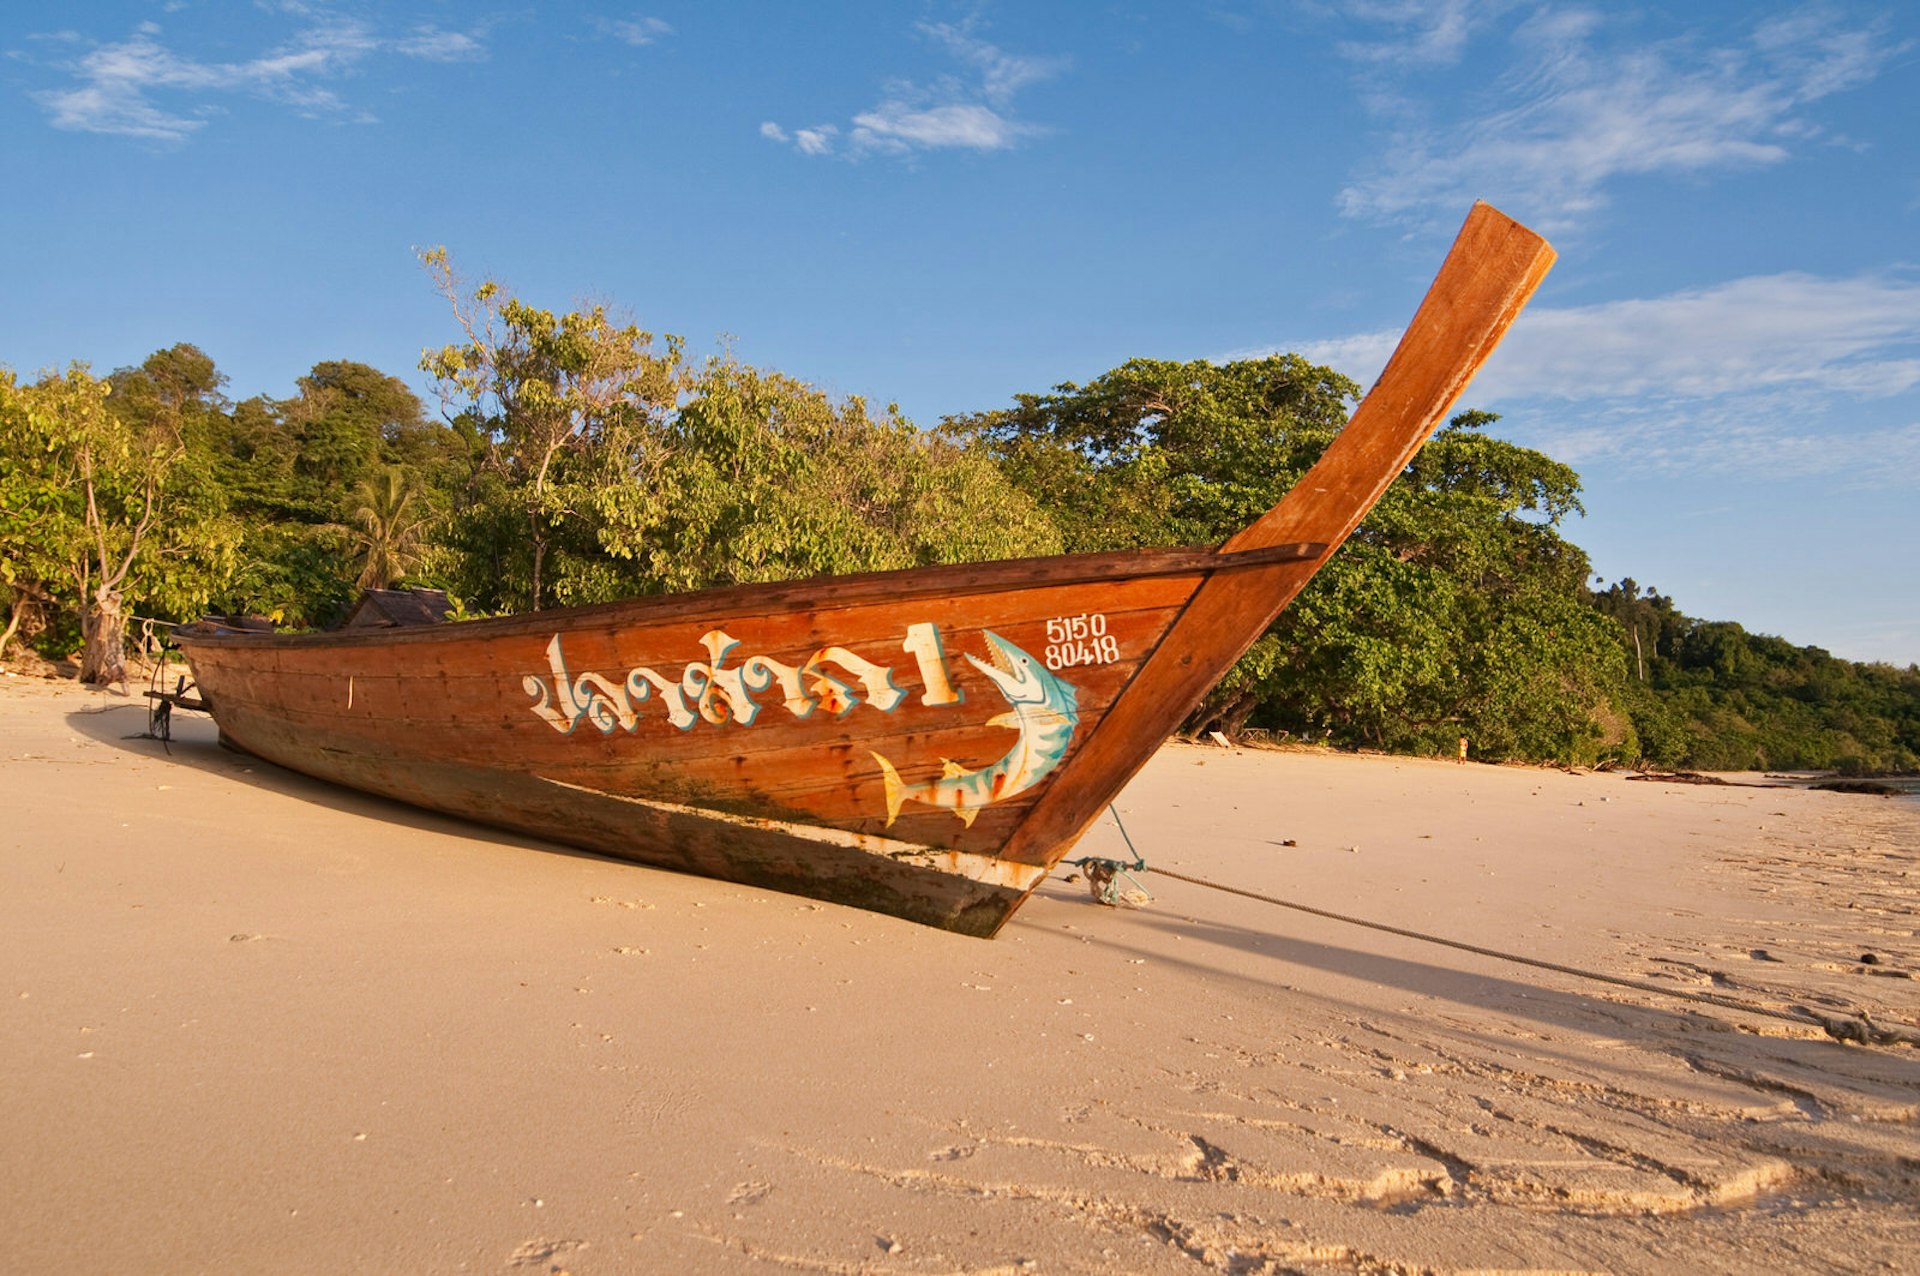 A beached boat sets the scene at Koh Kradan © Peter Fischer / CC by-SA 2.0